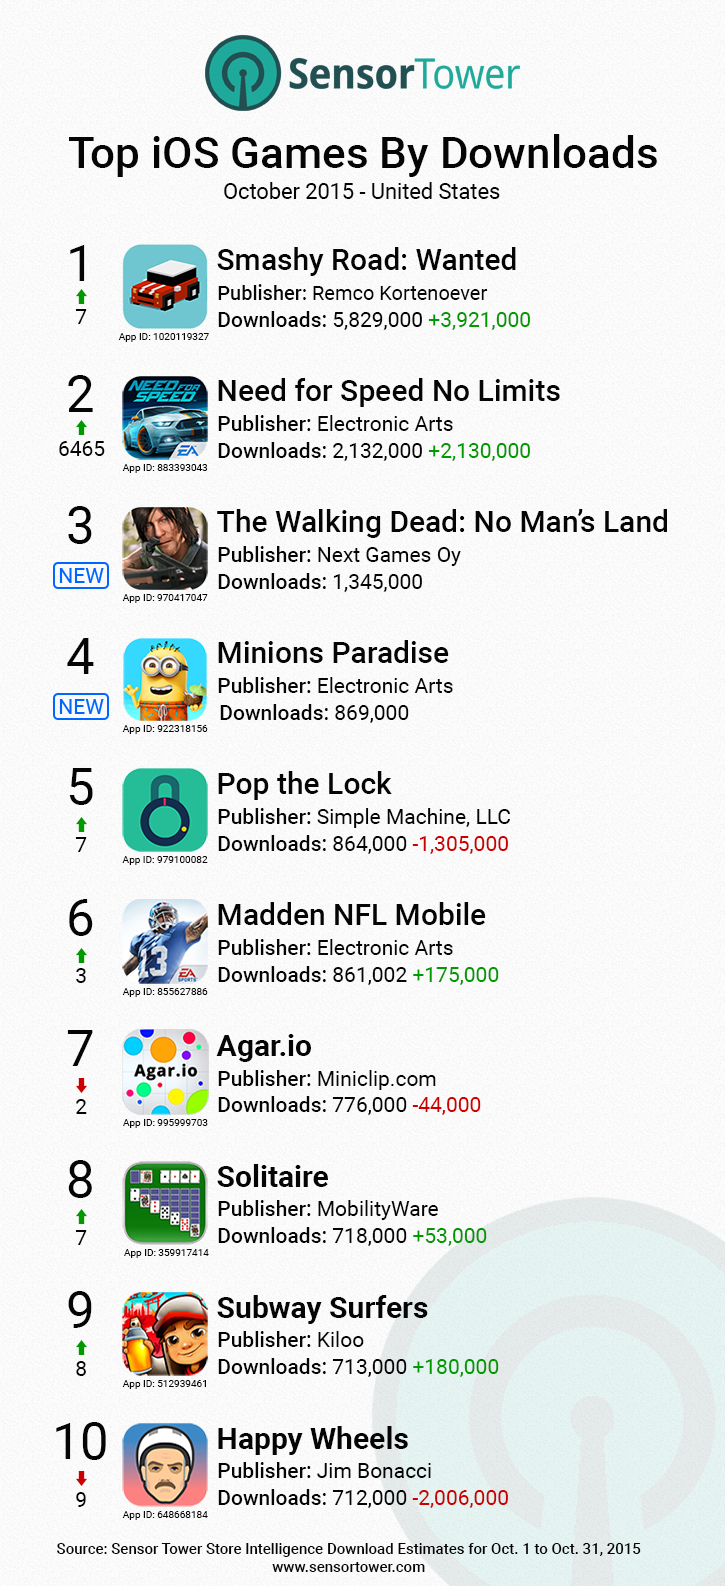 lt="iOS Games Top Downloads United States 2015